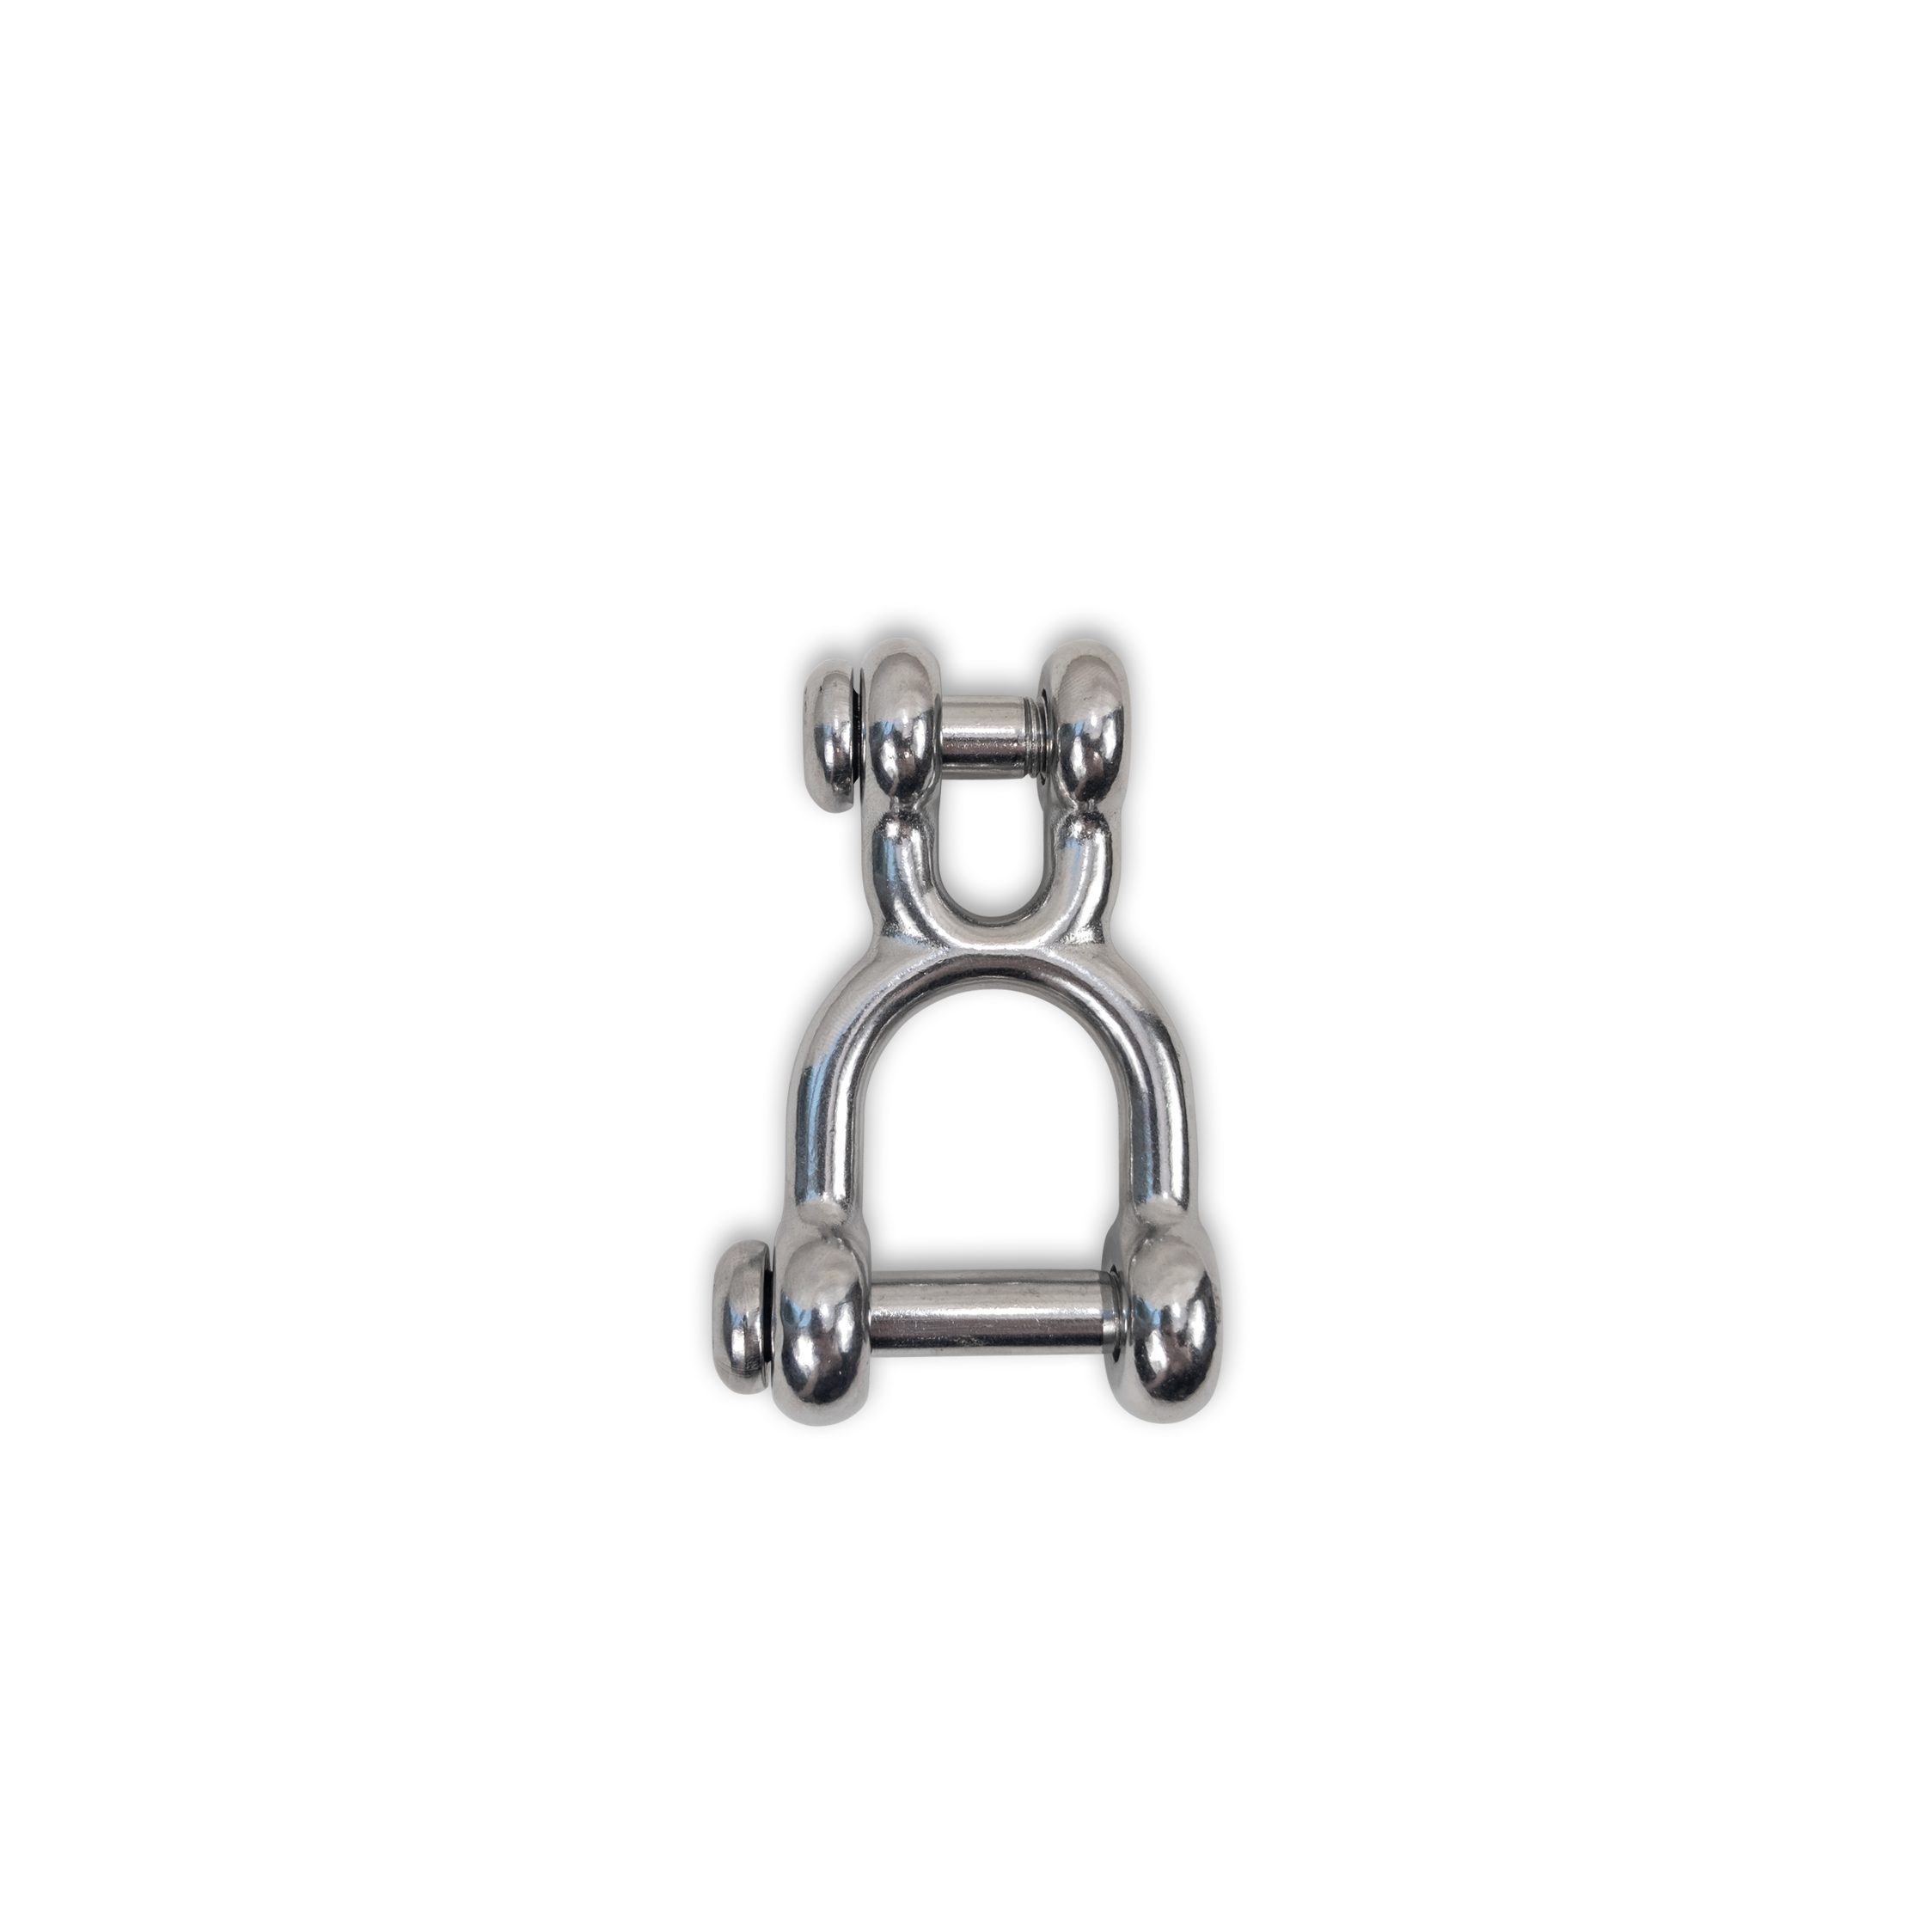 H173 - Double Clevis Shackle Stainless Steel w/ Anti-Theft Bolts -  Commercial - Jensen Swing Products Inc